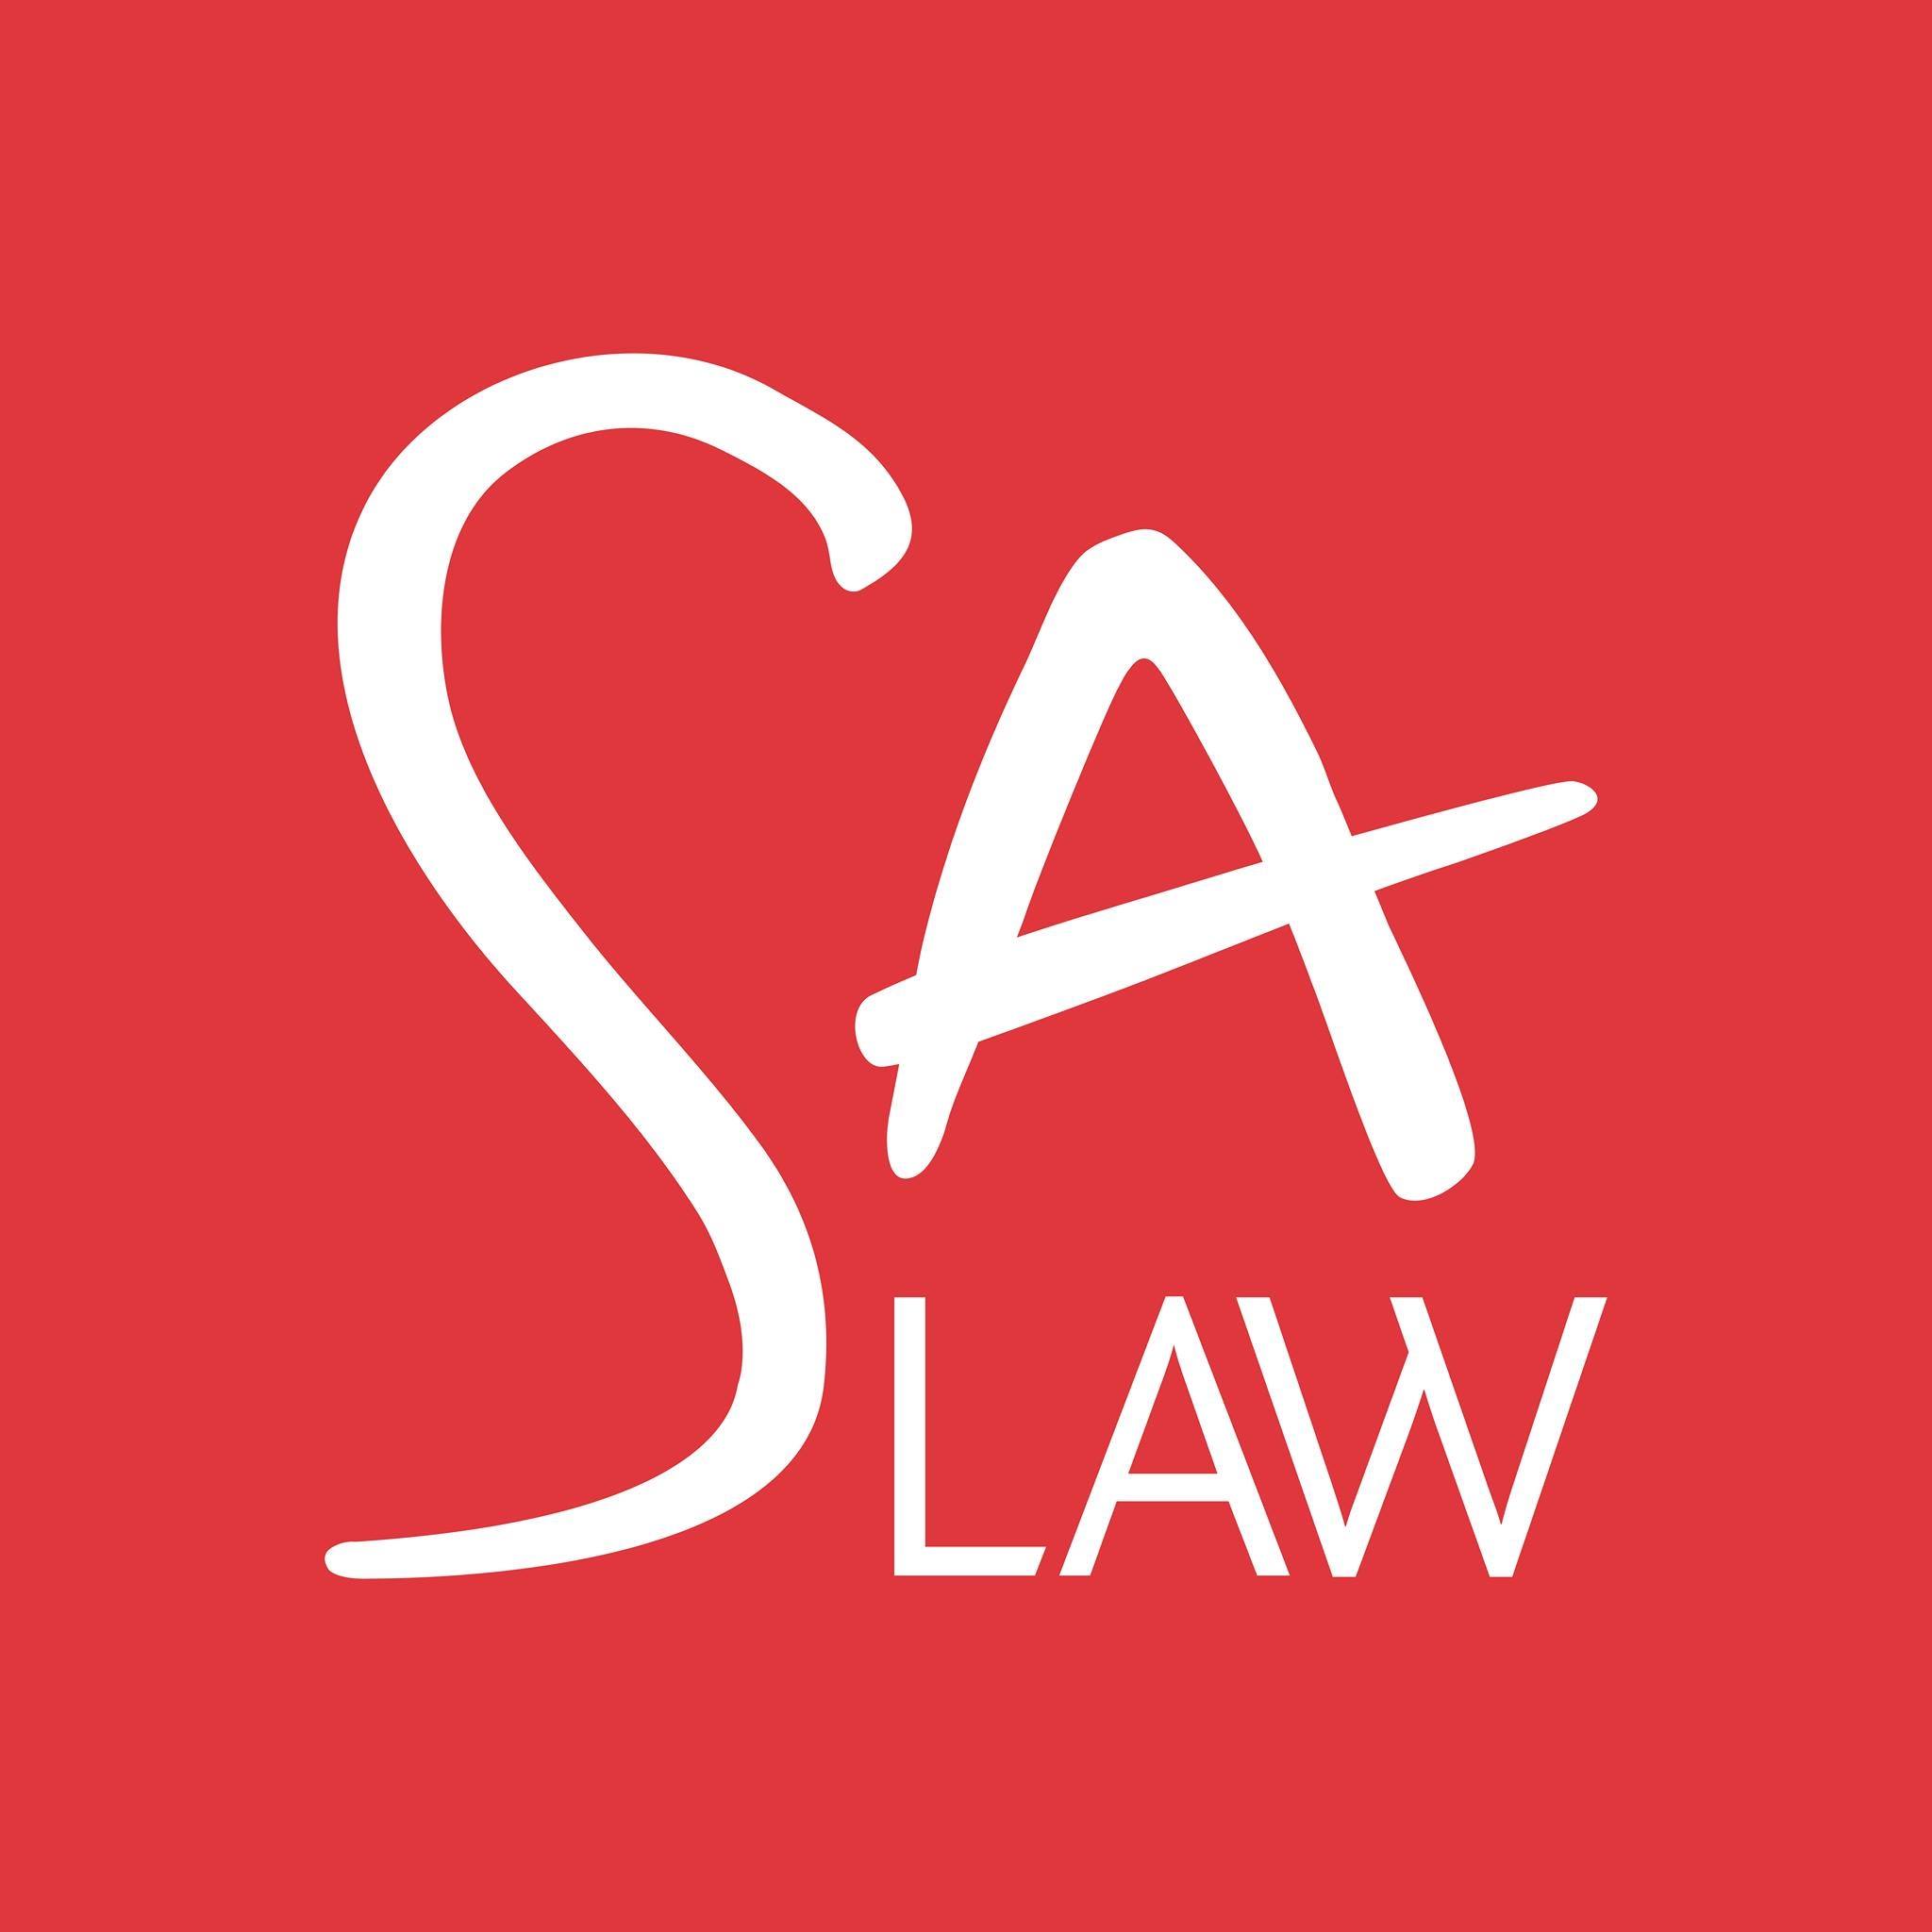 £50 voucher to spend at SA LAW